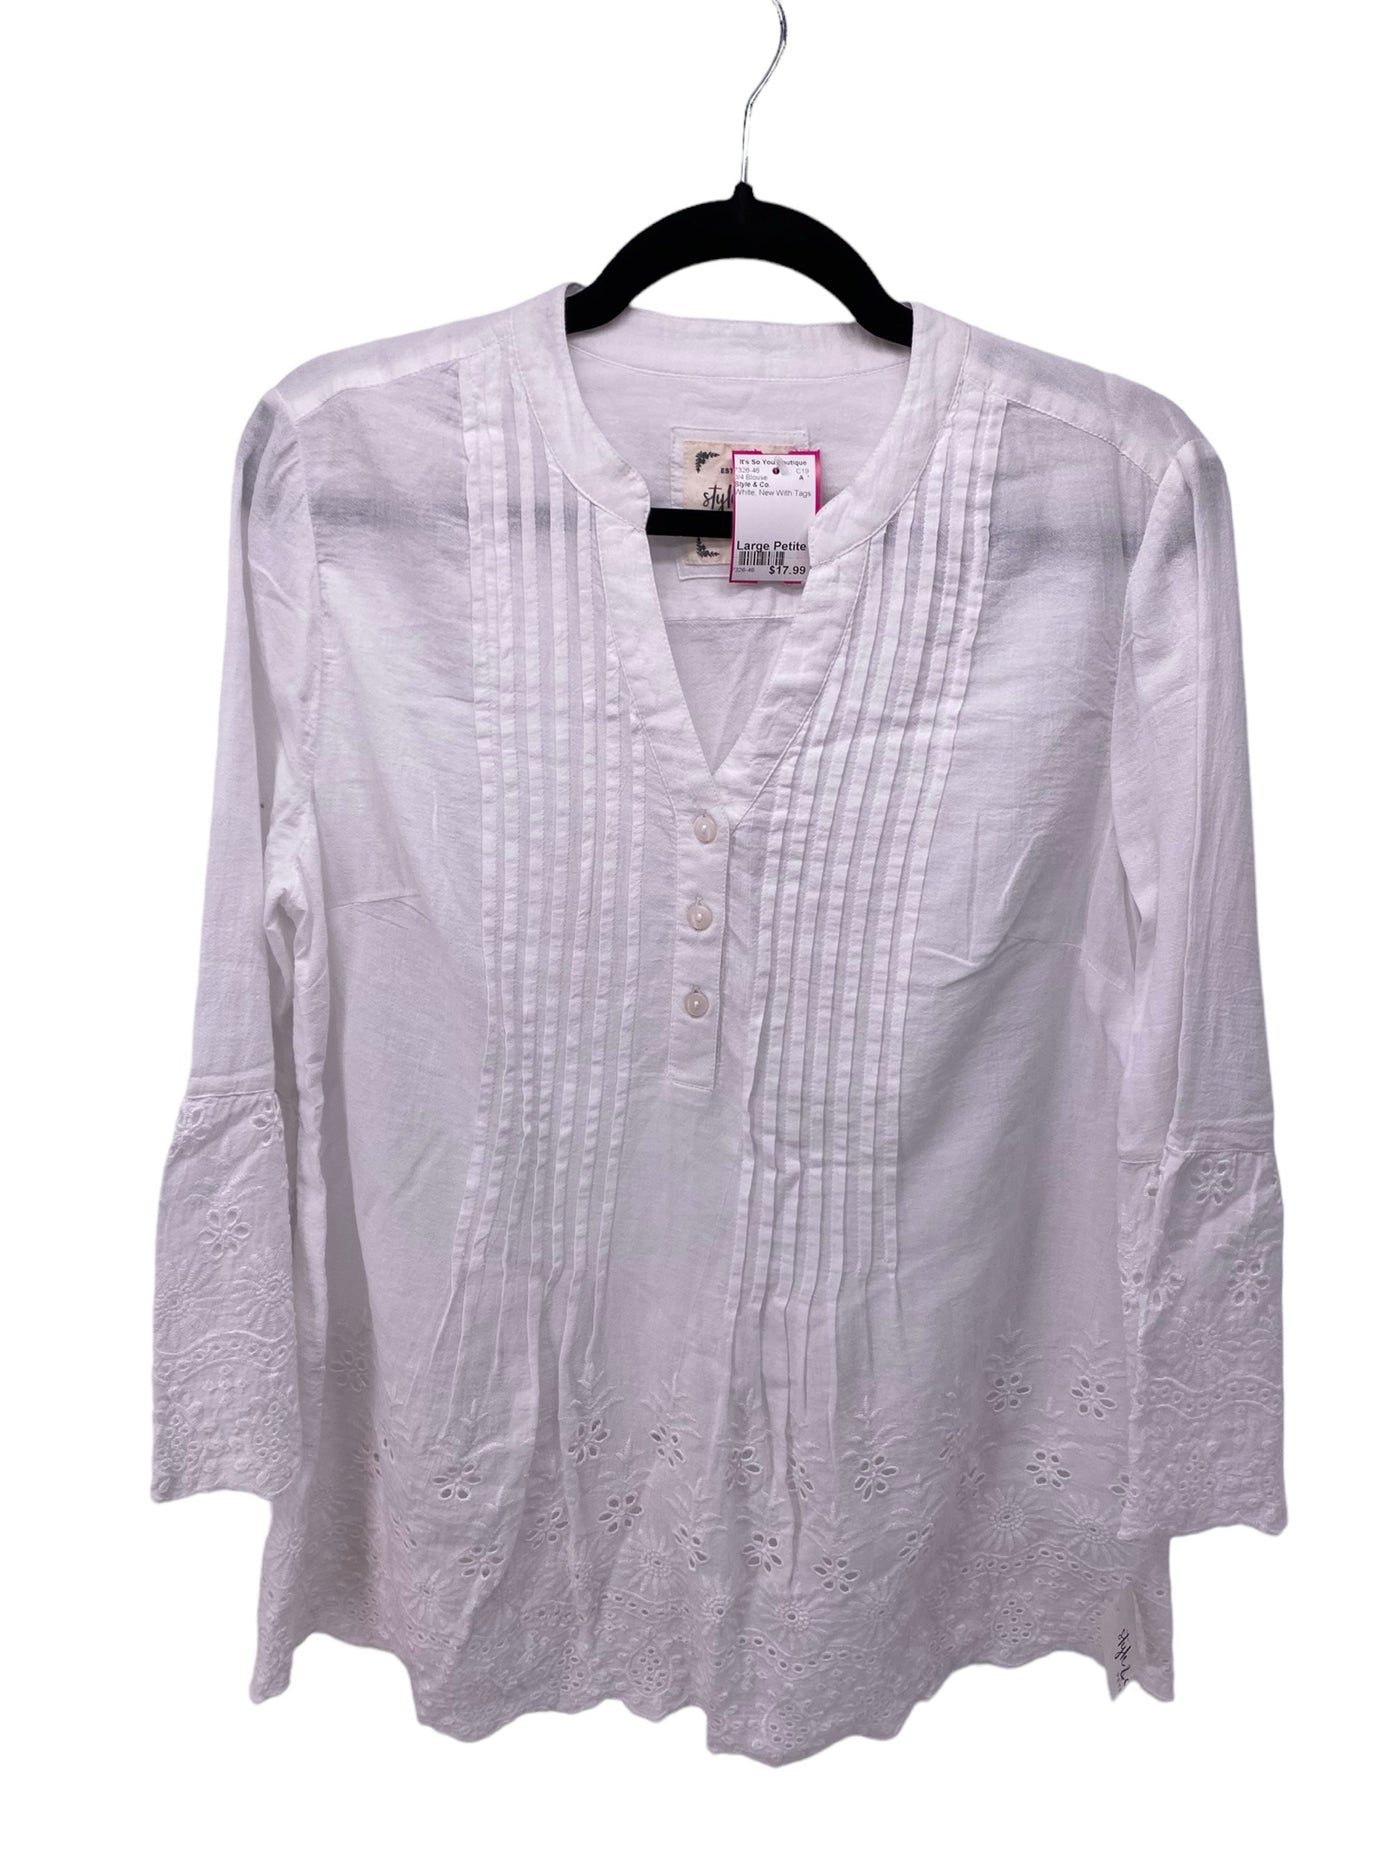 Style & Co. Misses Size Large Petite White New With Tags 3/4 Blouse